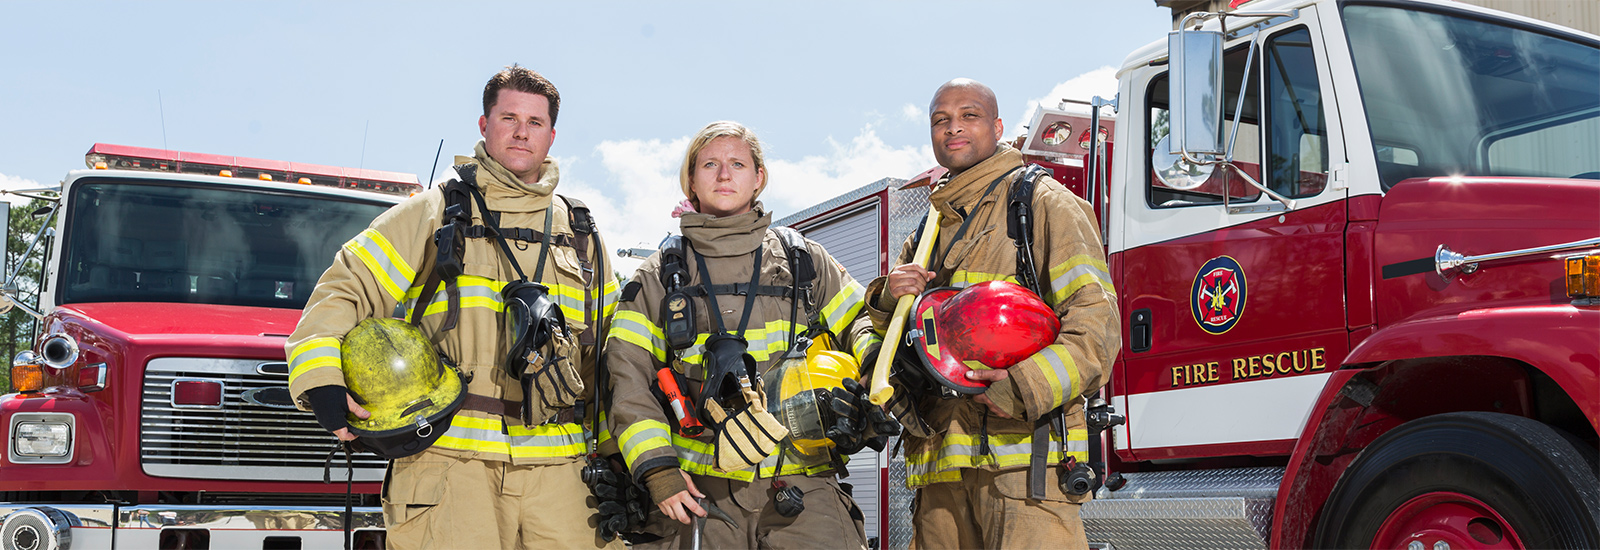 Group of Fire Fighters standing in front of fire trucks